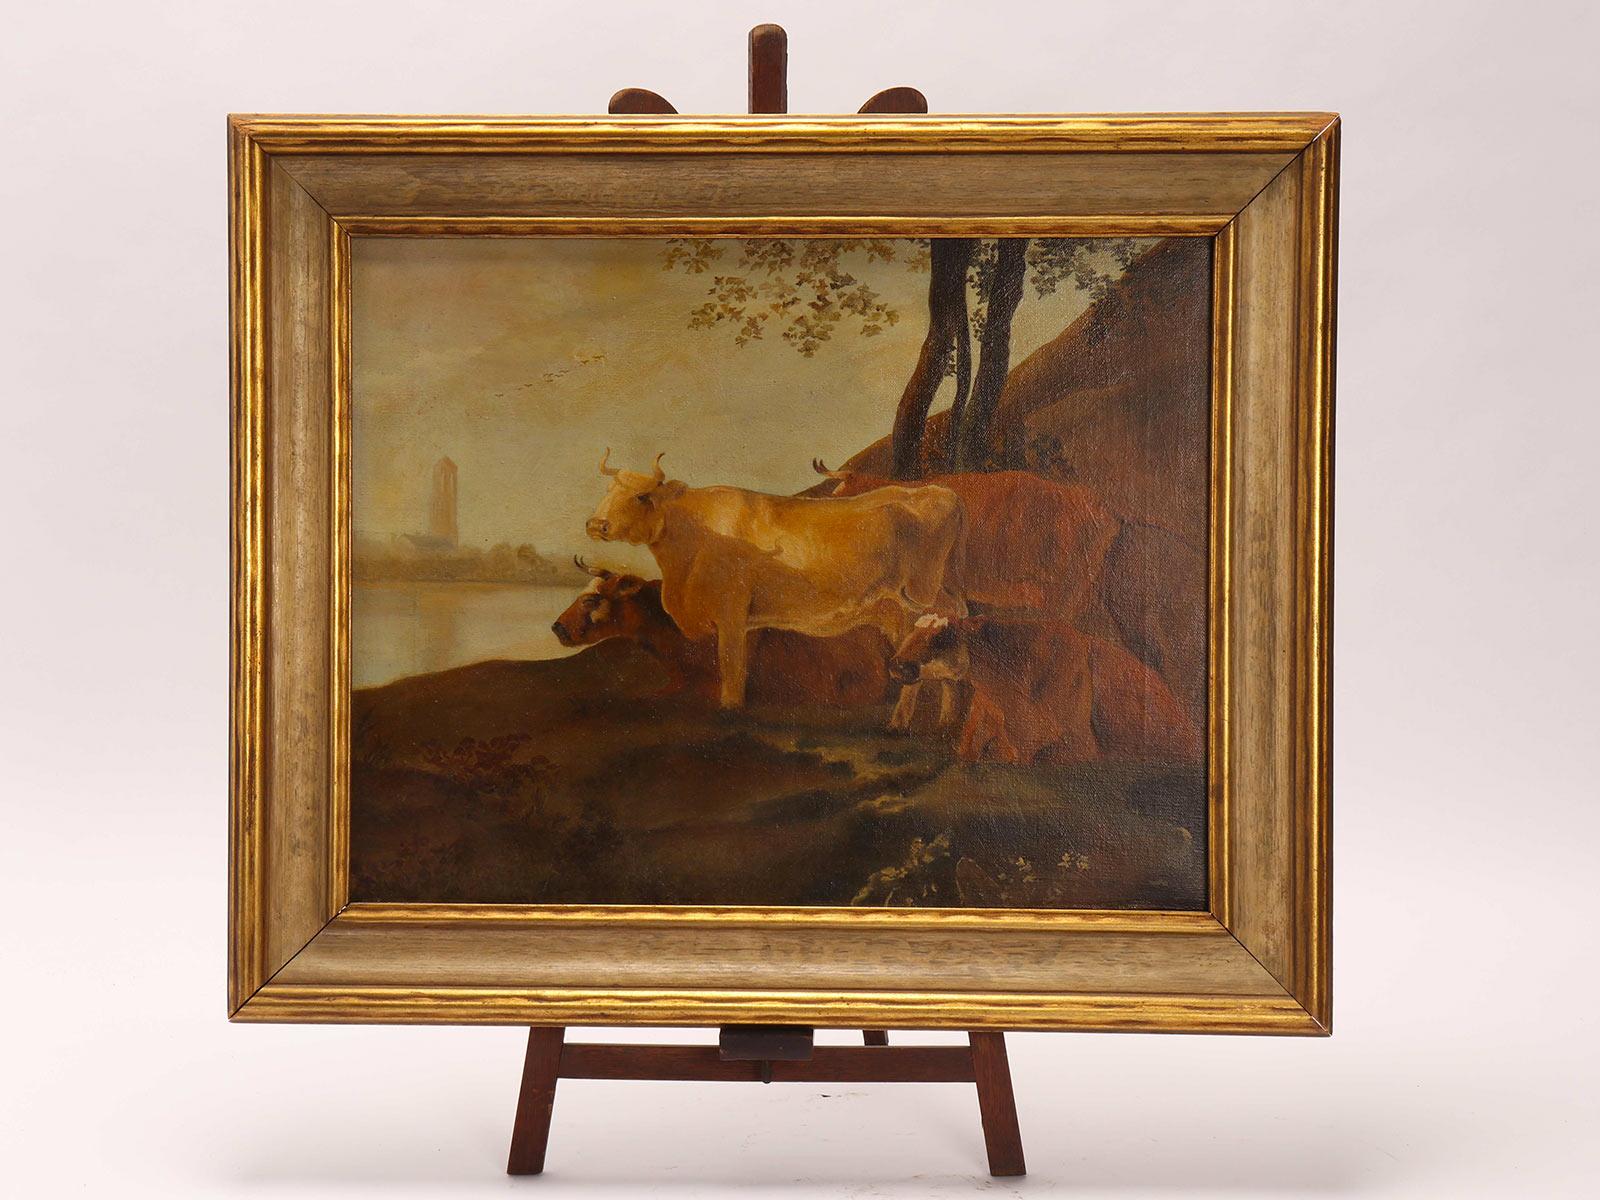 An oil on canvas painting depicting a group of cows. Golden painted frame. Austria, 1880 ca.